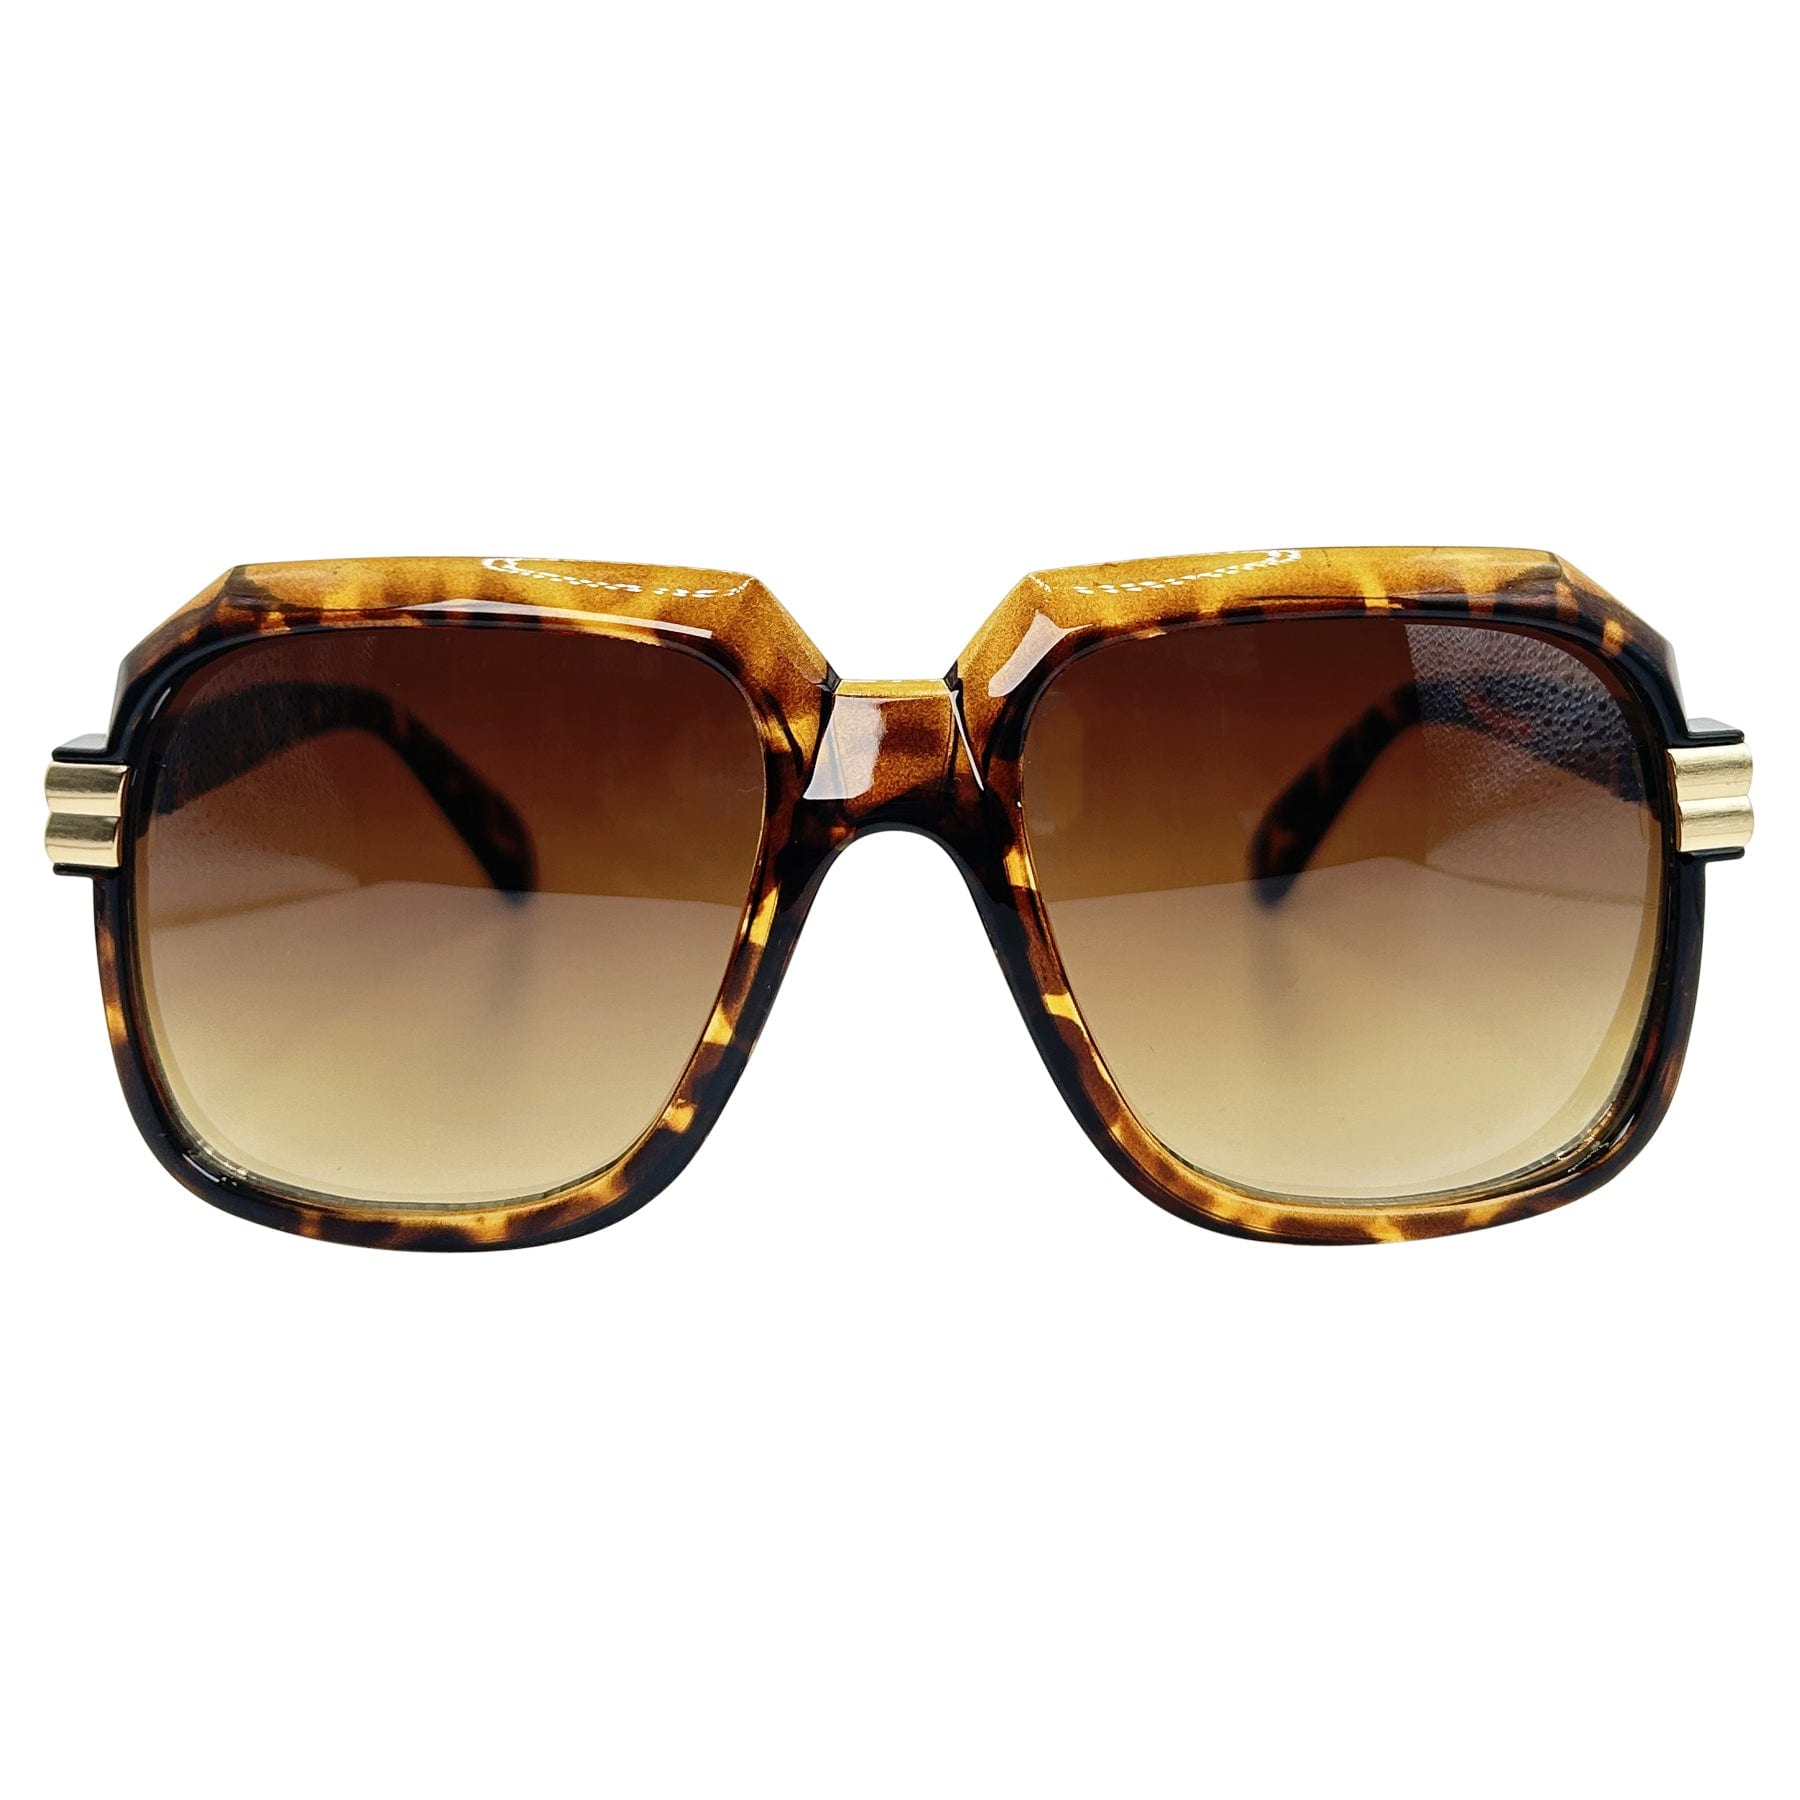 y2k oversized square style tortoise sunglasses with an amber lens